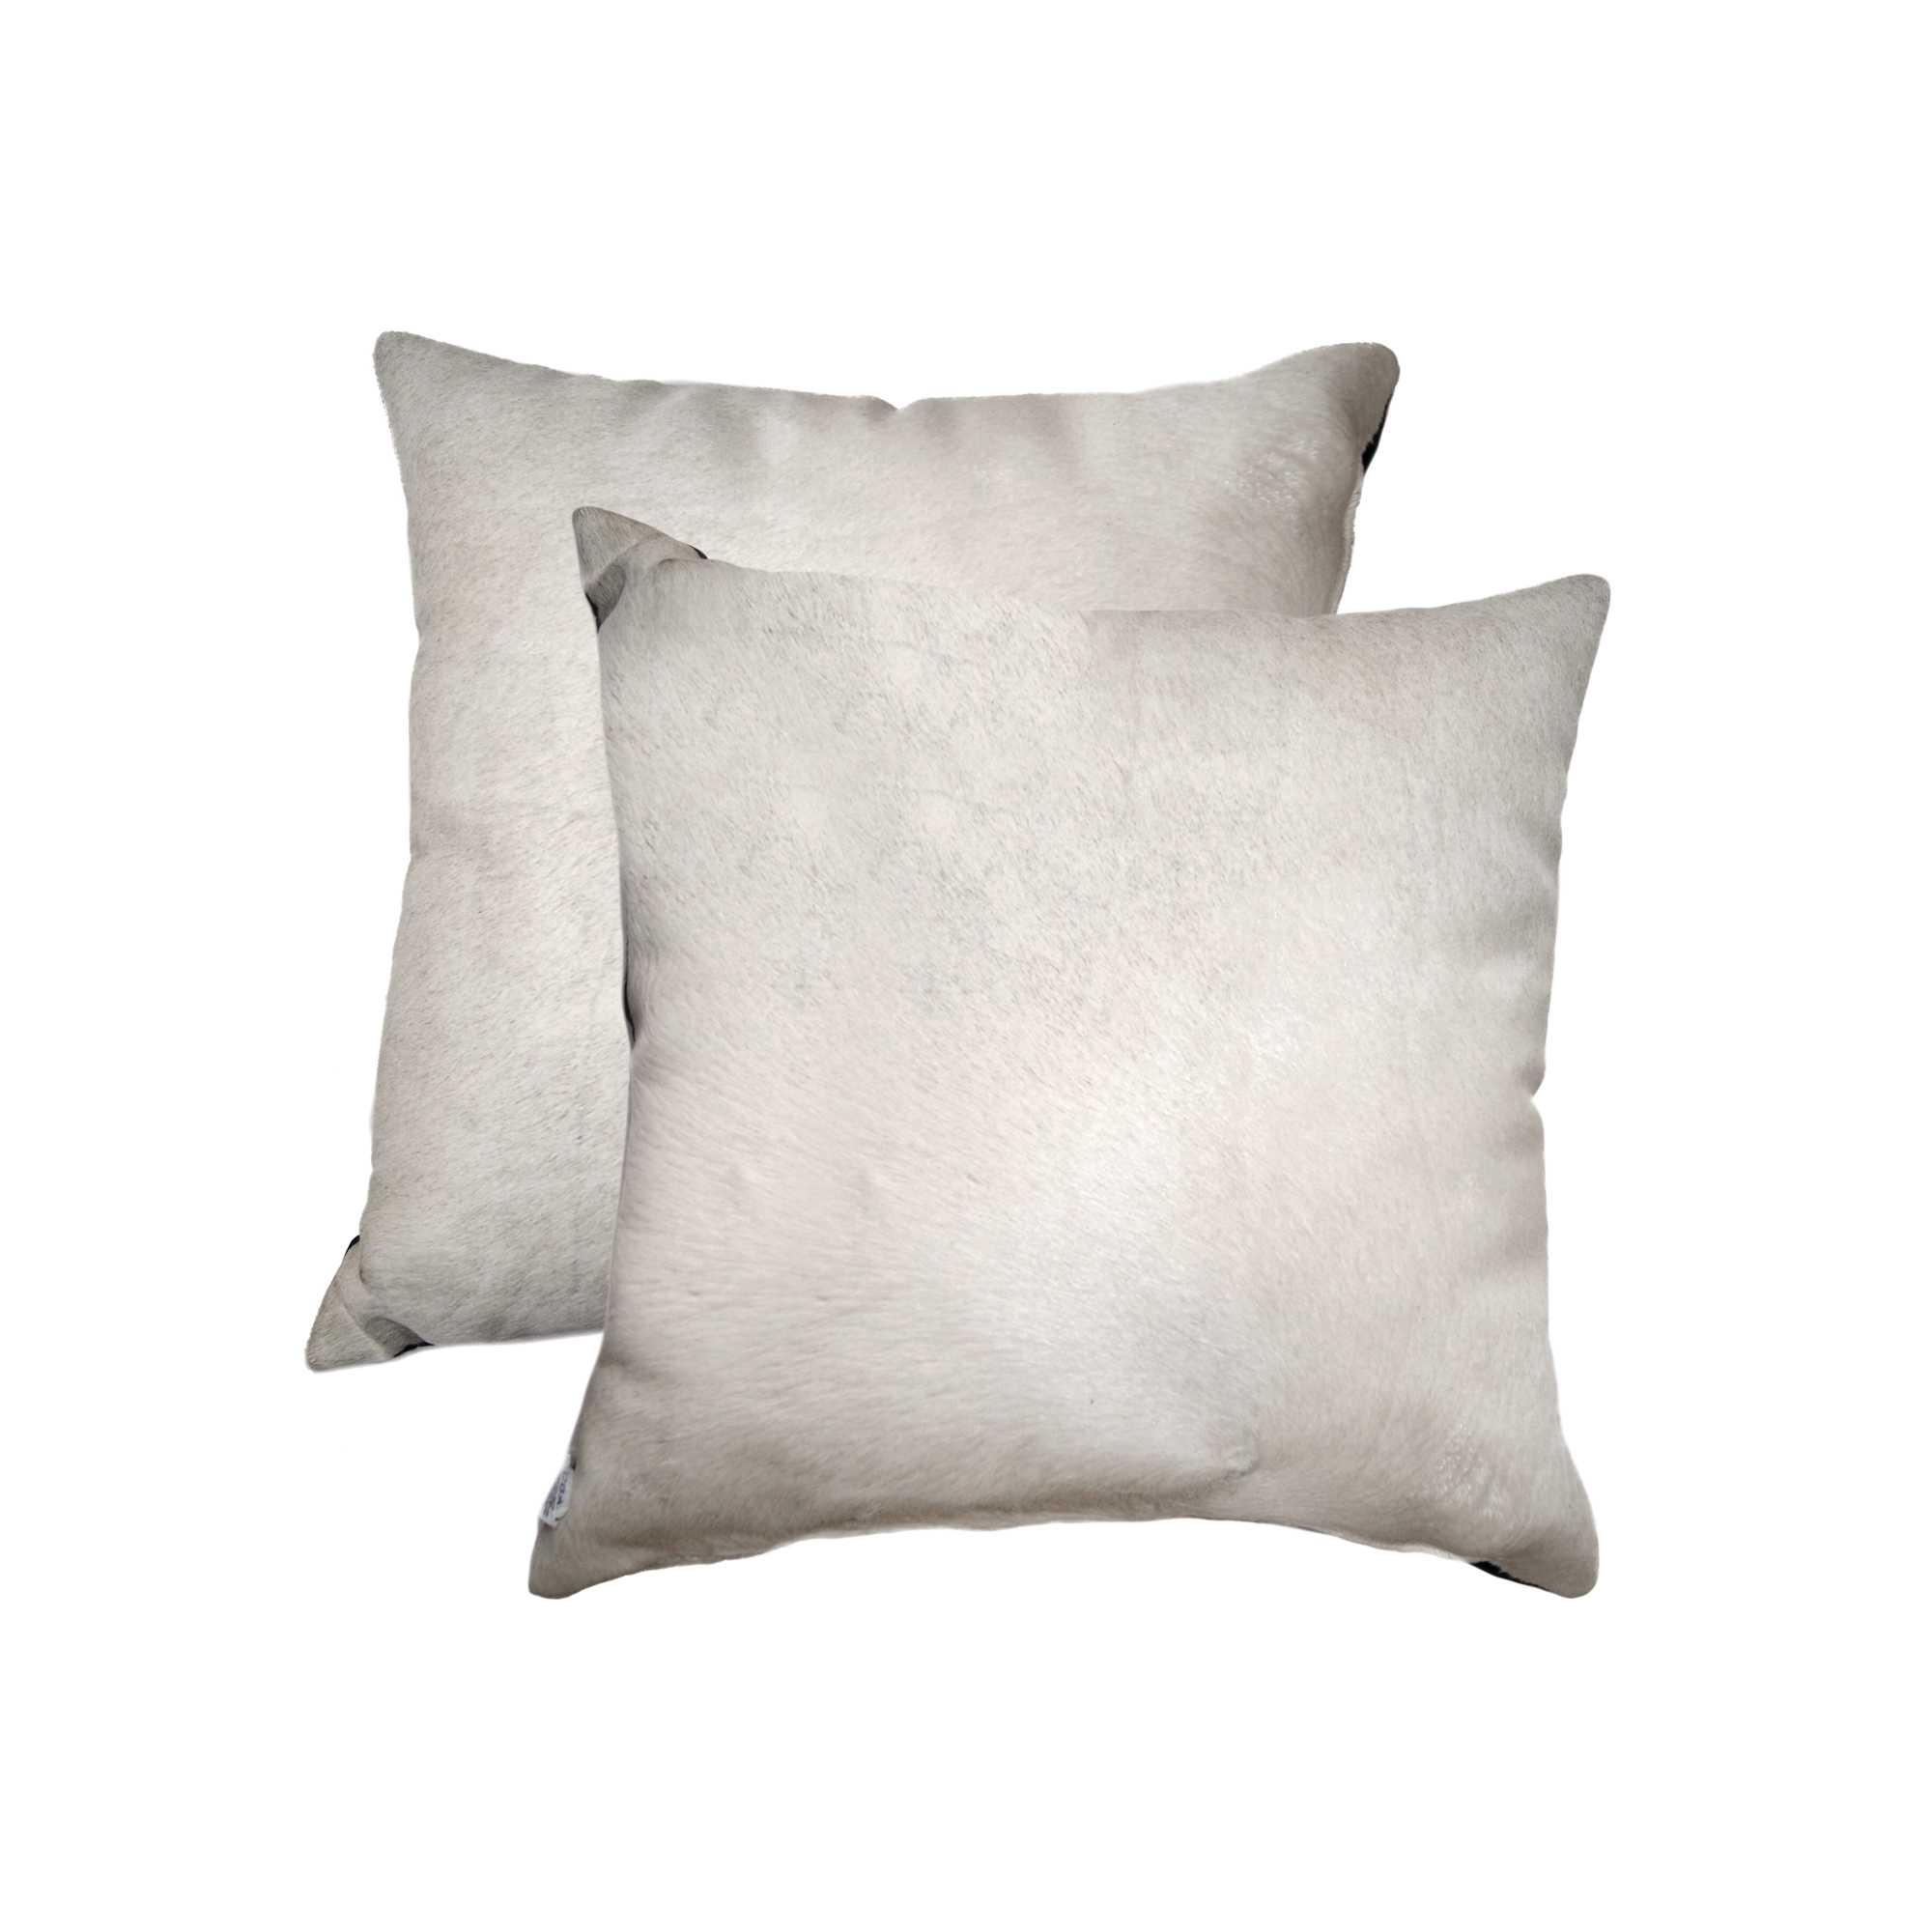 18" x 18" x 5" Off White Cowhide - Pillow 2-Pack